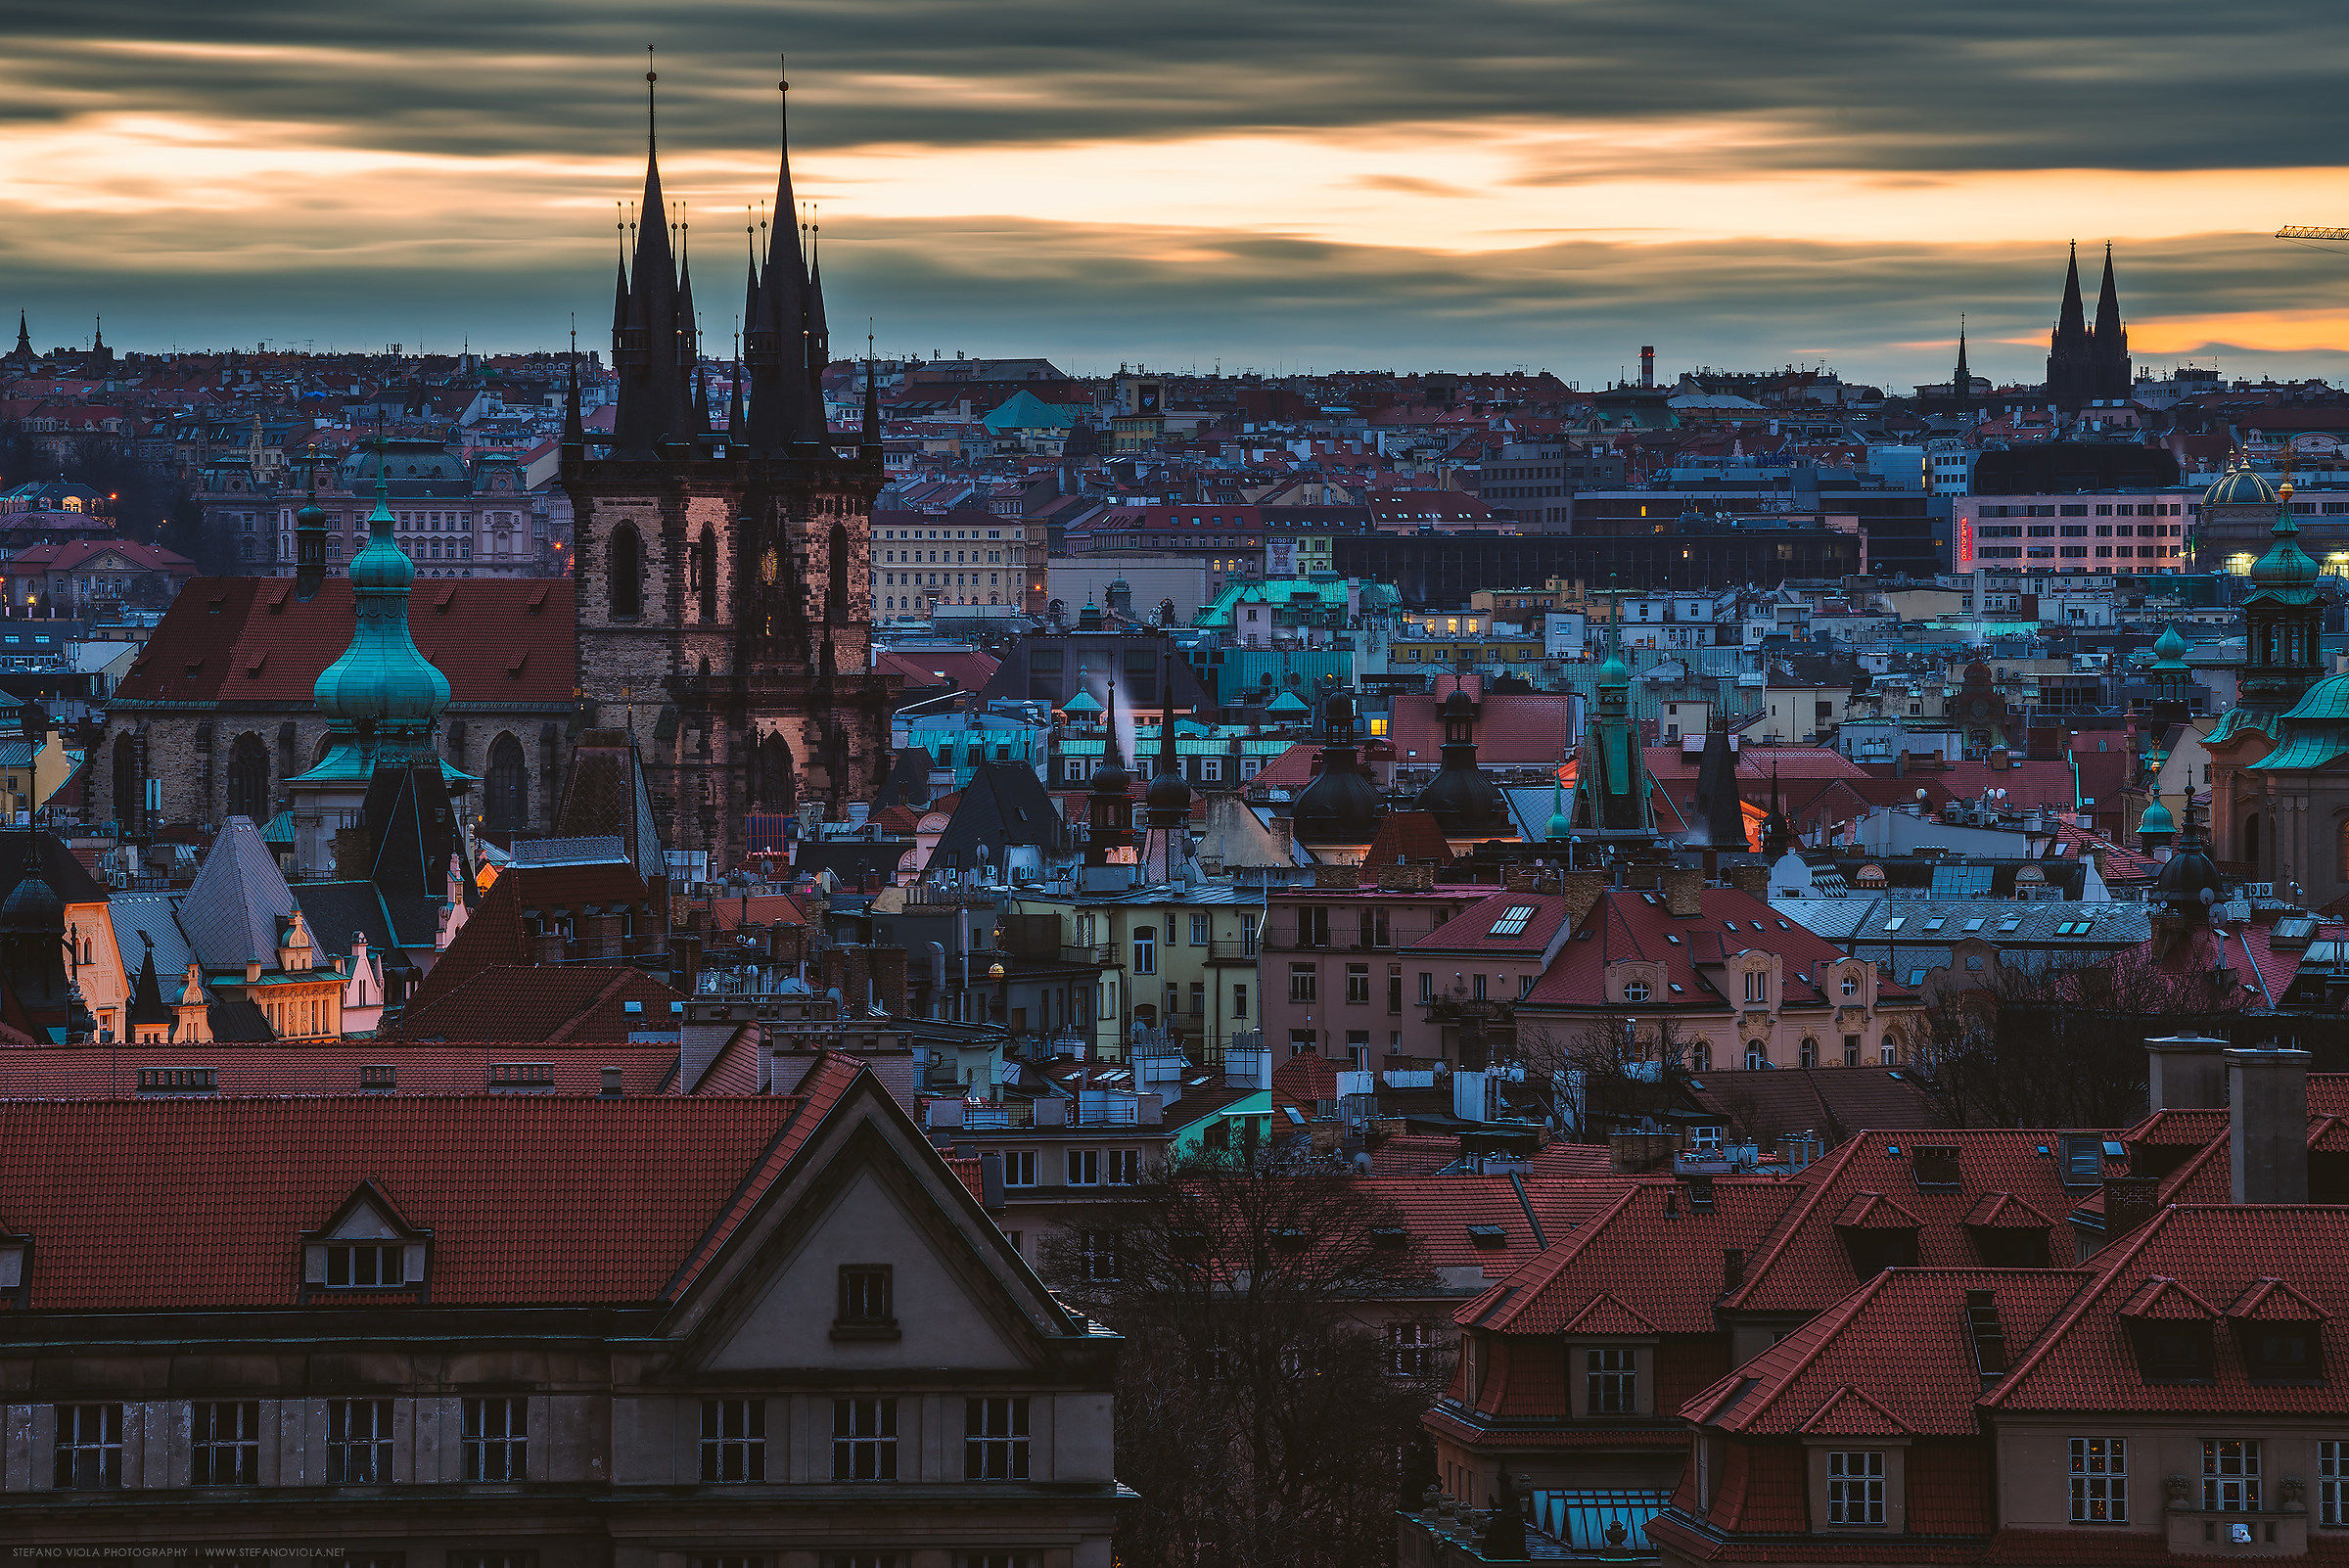 Sunset on the rooftops of Prague...